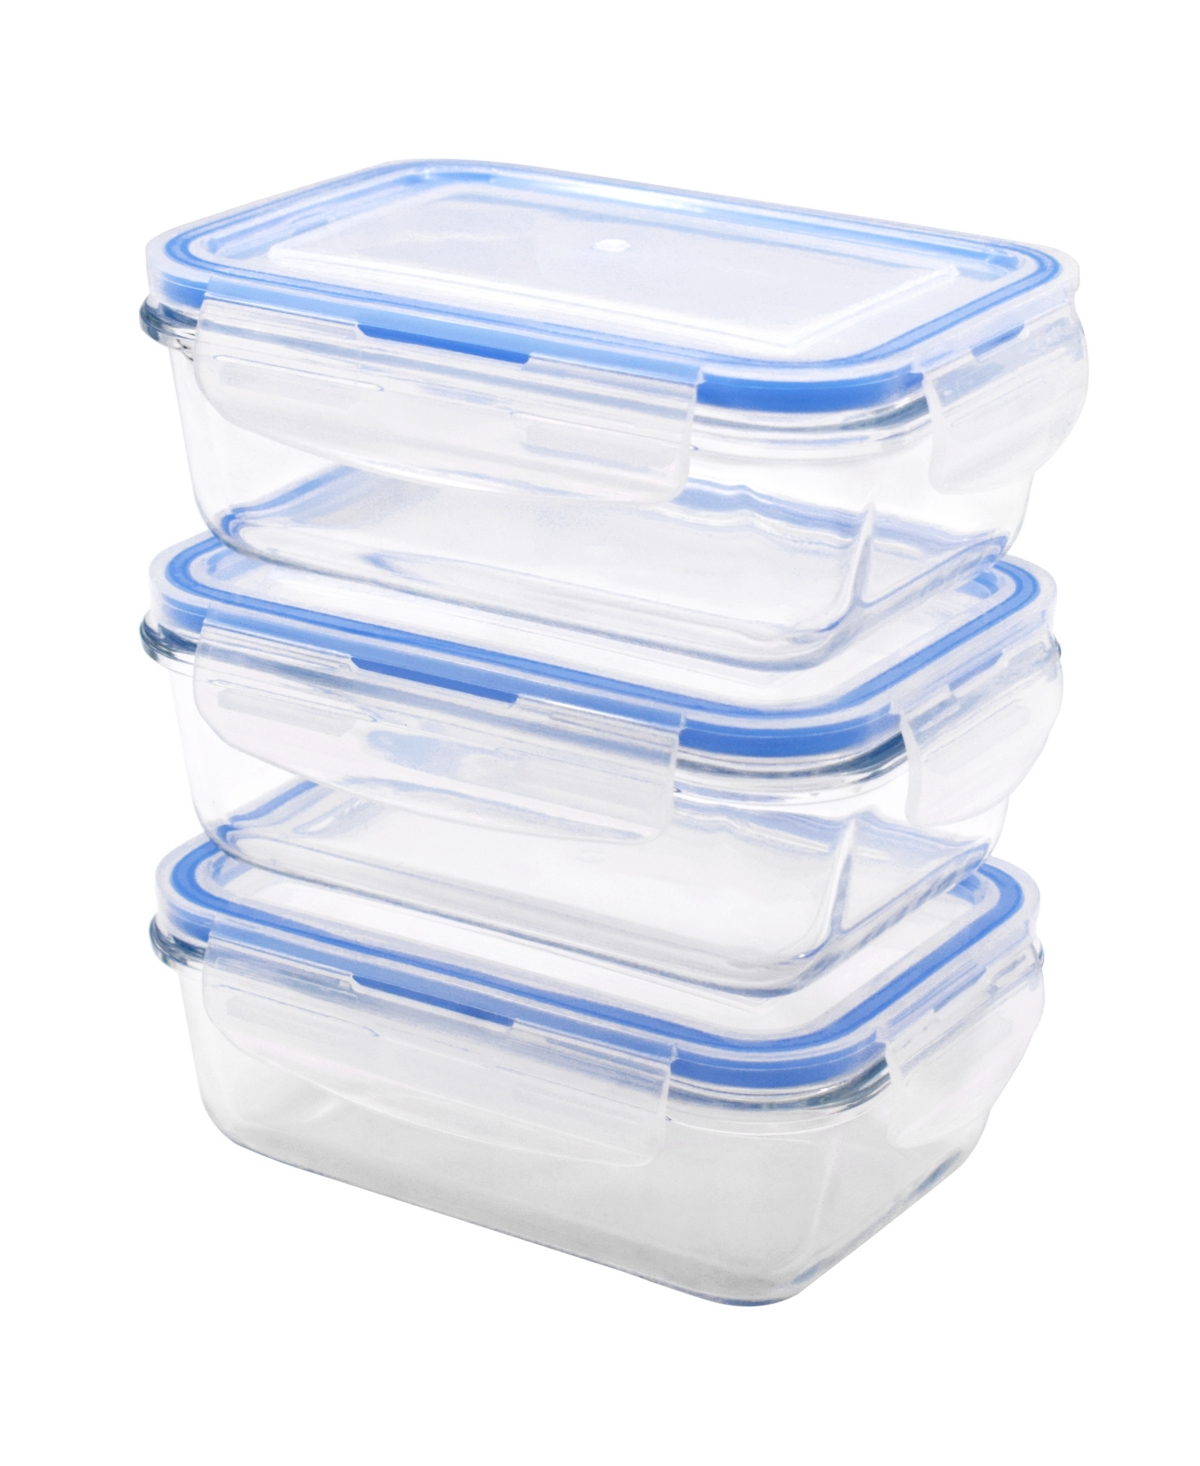 Art & Cook 3 Piece Rectangle 570 ml Food Storage With Locking Lid Set In Blue